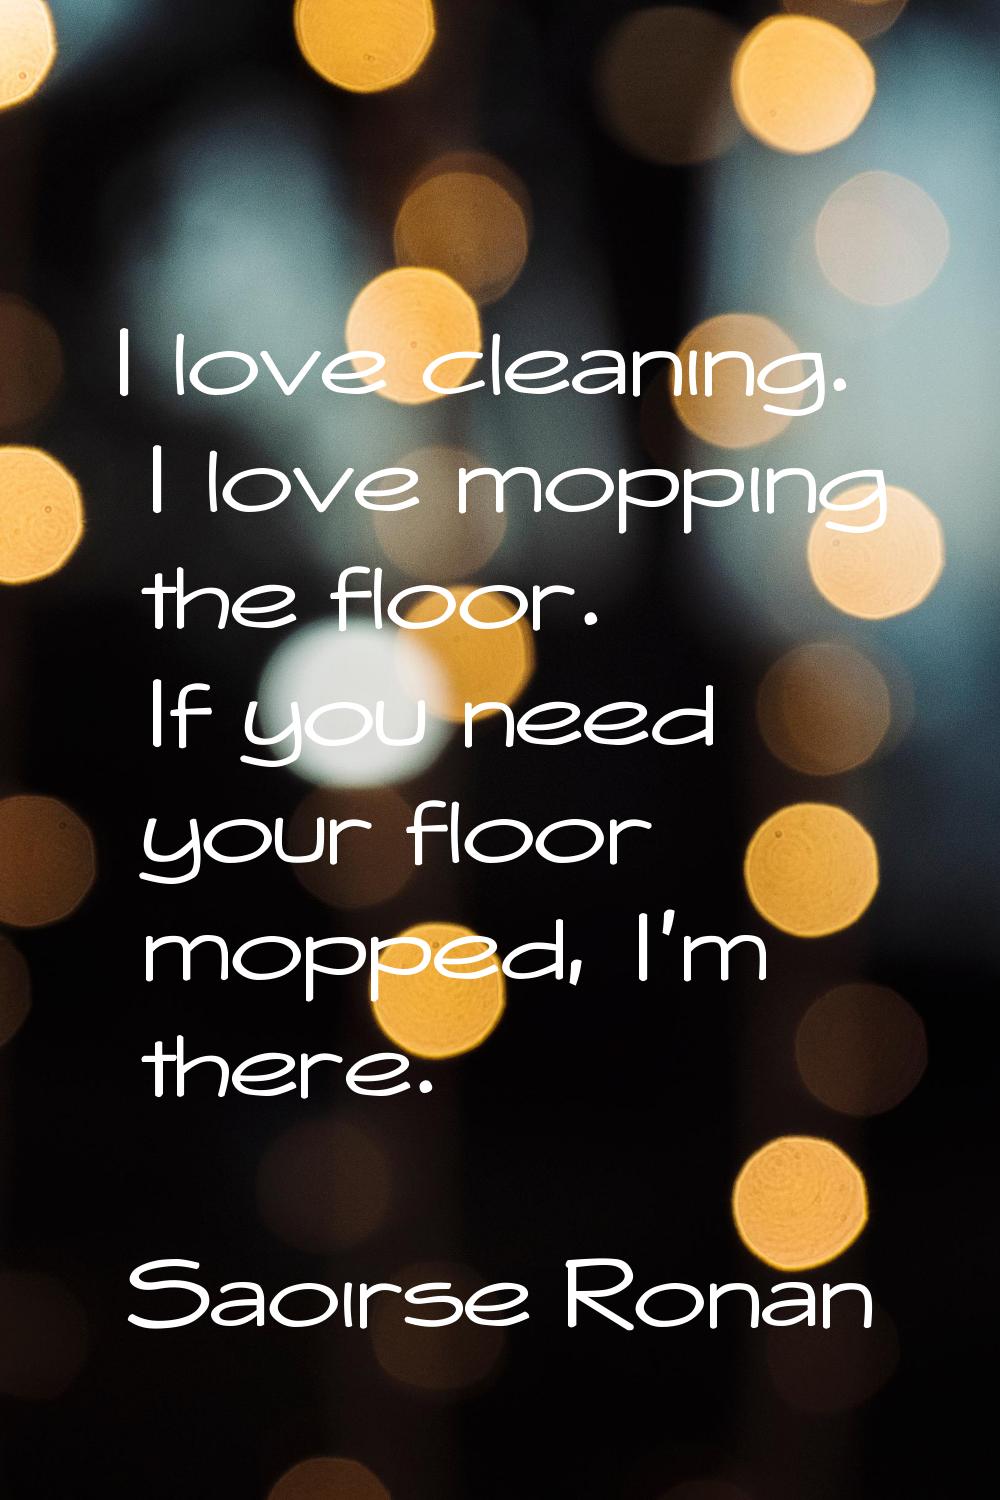 I love cleaning. I love mopping the floor. If you need your floor mopped, I'm there.